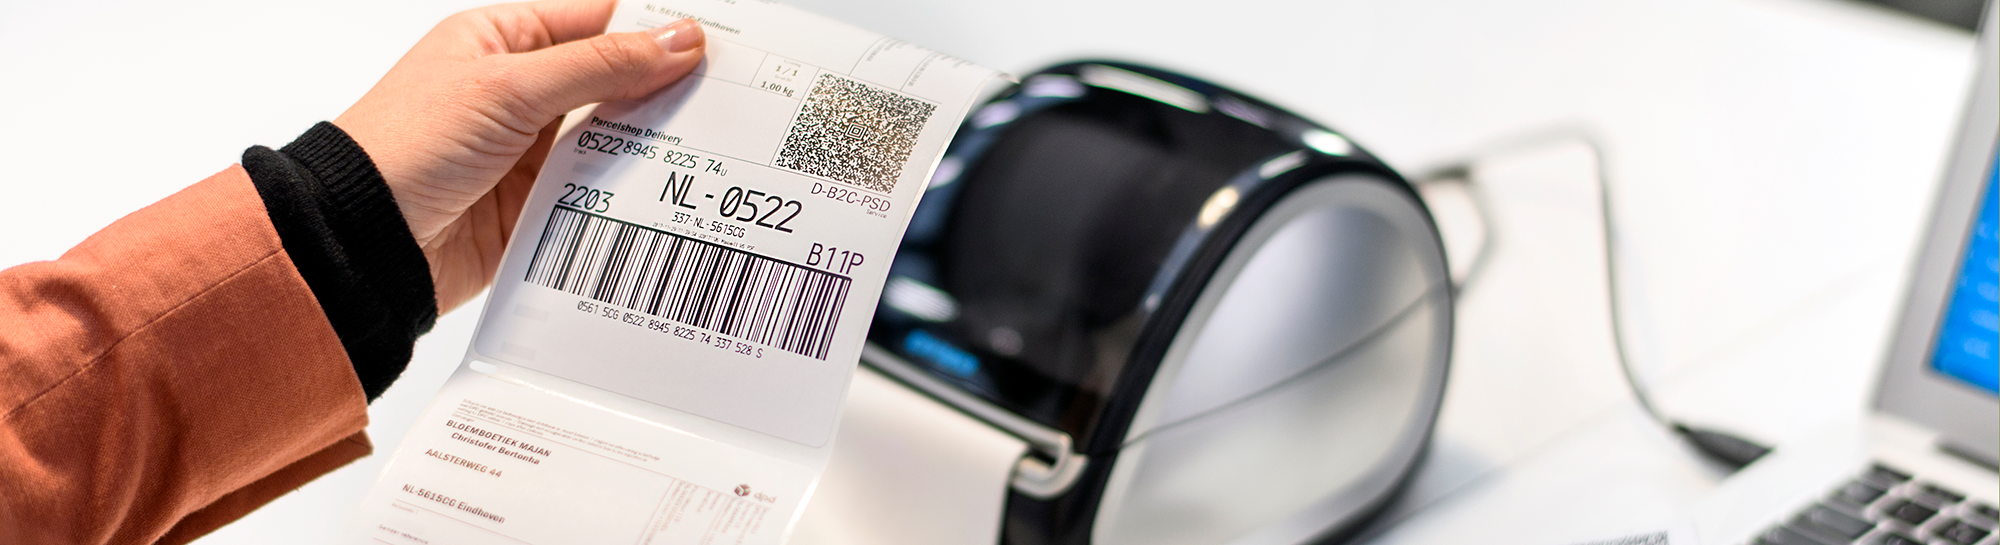 The ultimate e-commerce guide to postage label printers for shipping labels